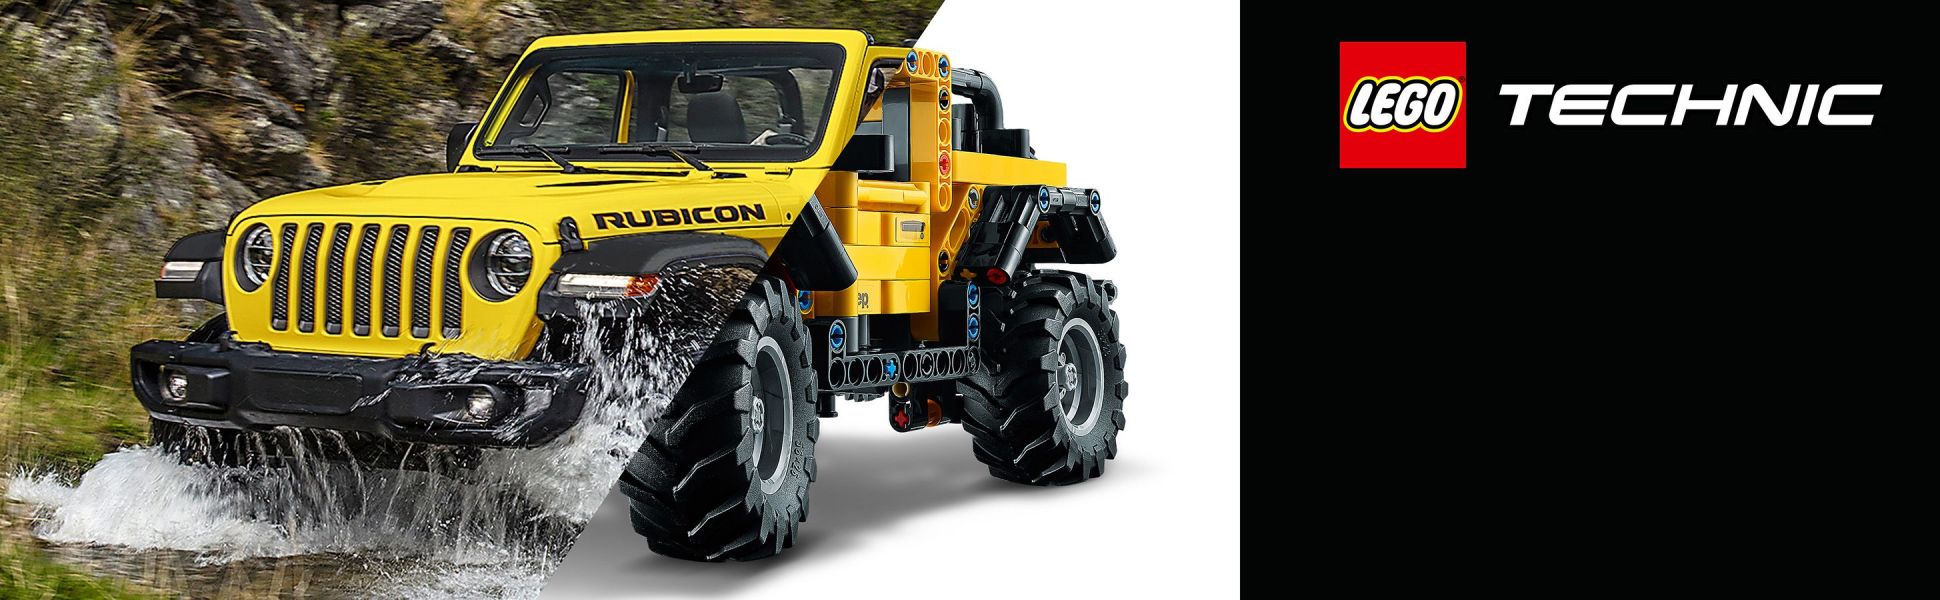 This Lego Jeep Wrangler Is Here to Conquer Your Backyard